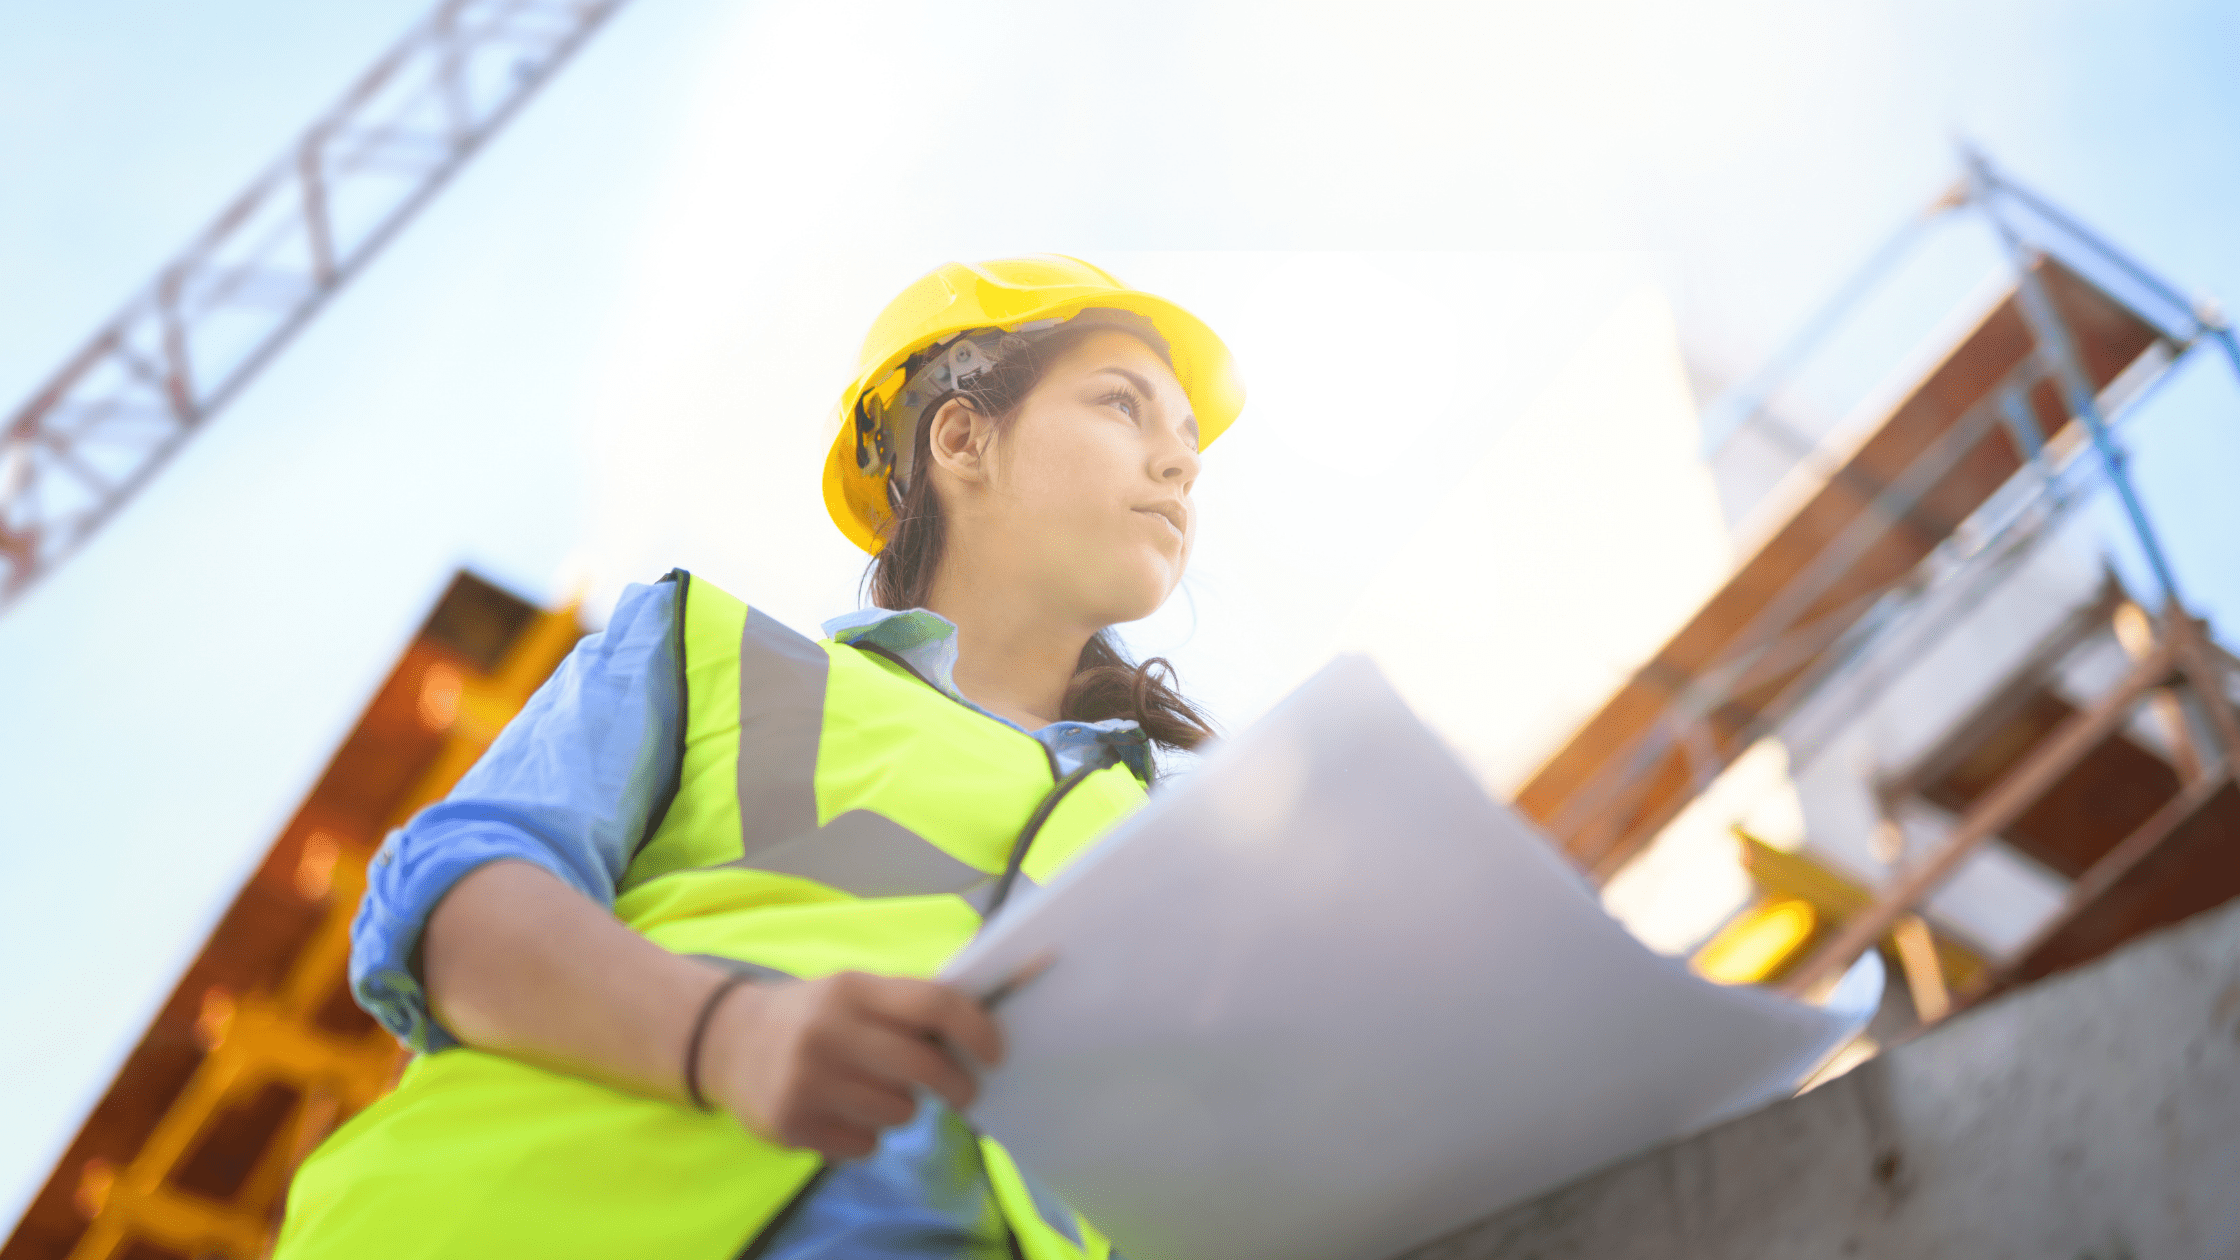 How to Get a Construction Job Without Experience